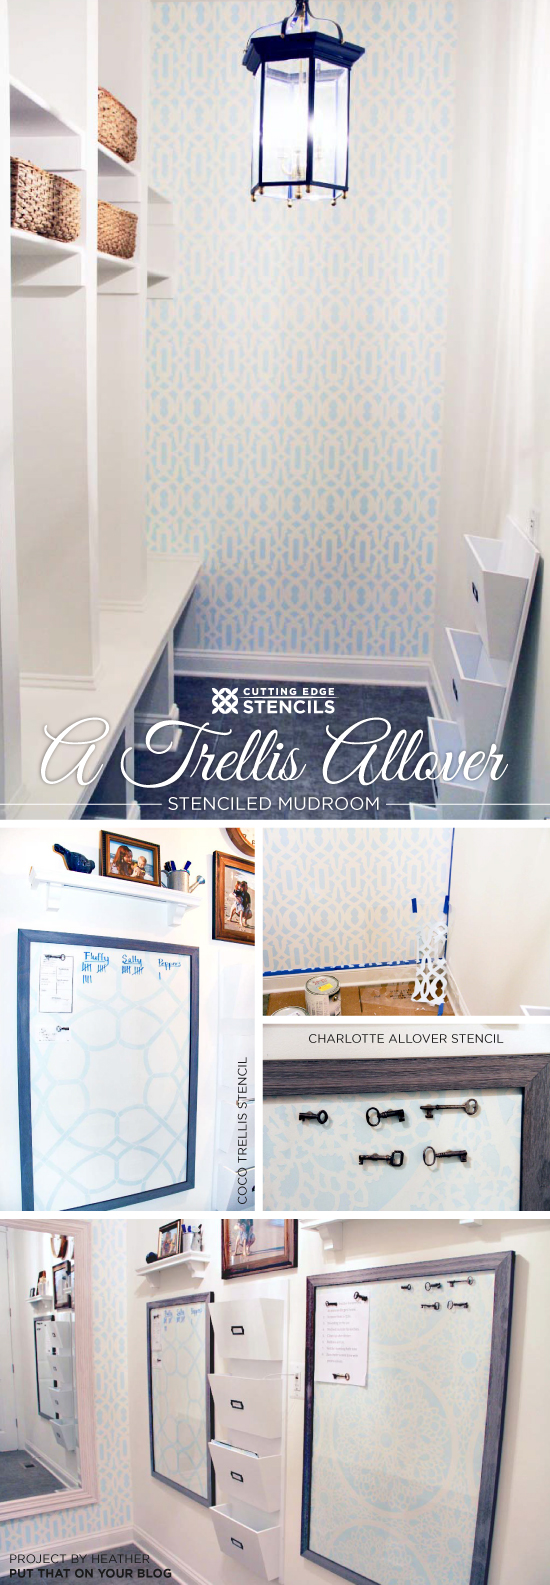 Cutting Edge Stencils shares a DIY stenciled accent wall in a mudroom featuring the Trellis Allover wall pattern. http://www.cuttingedgestencils.com/allover-stencil.html